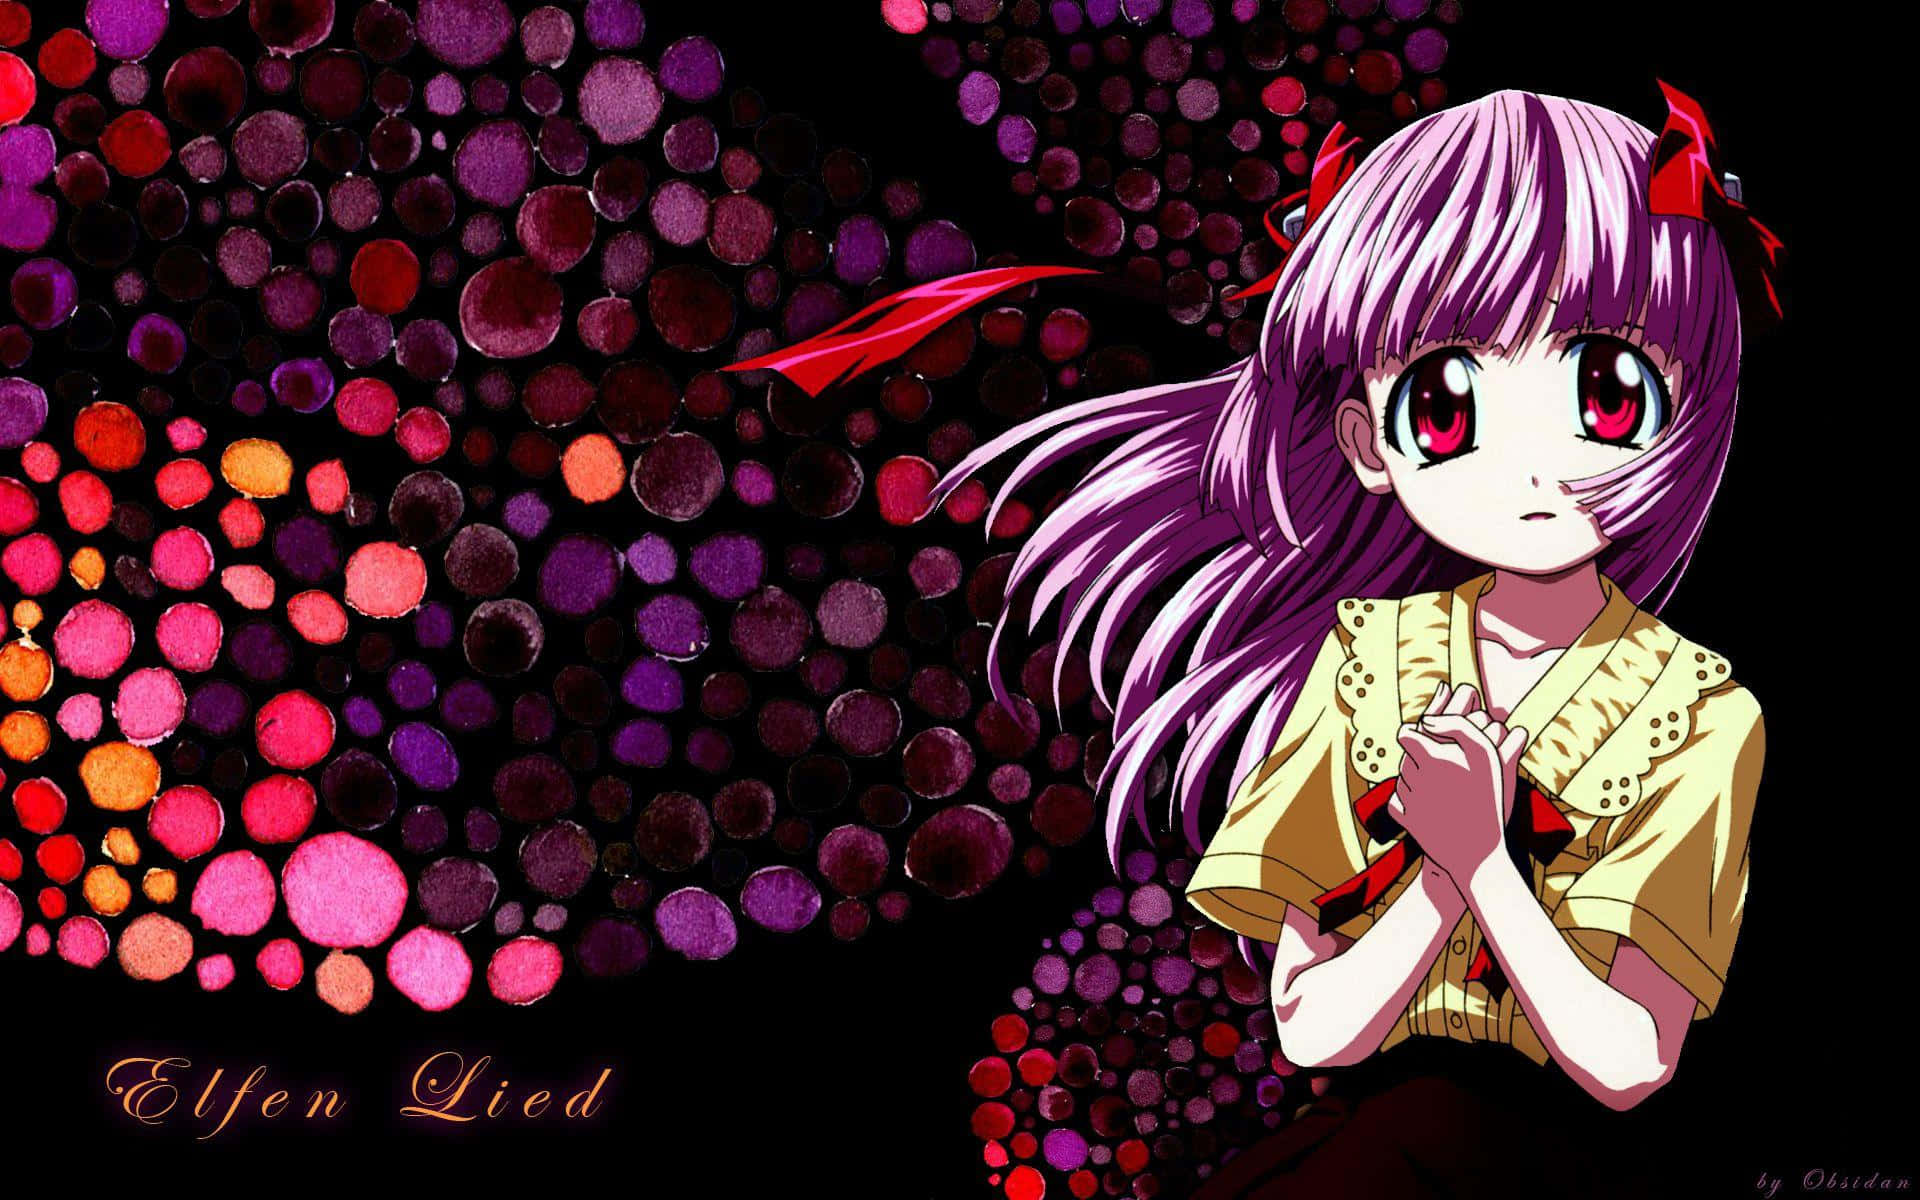 "Ludsy Lilium and Nyu, the two protagonists of the manga/anime series, Elfen Lied"